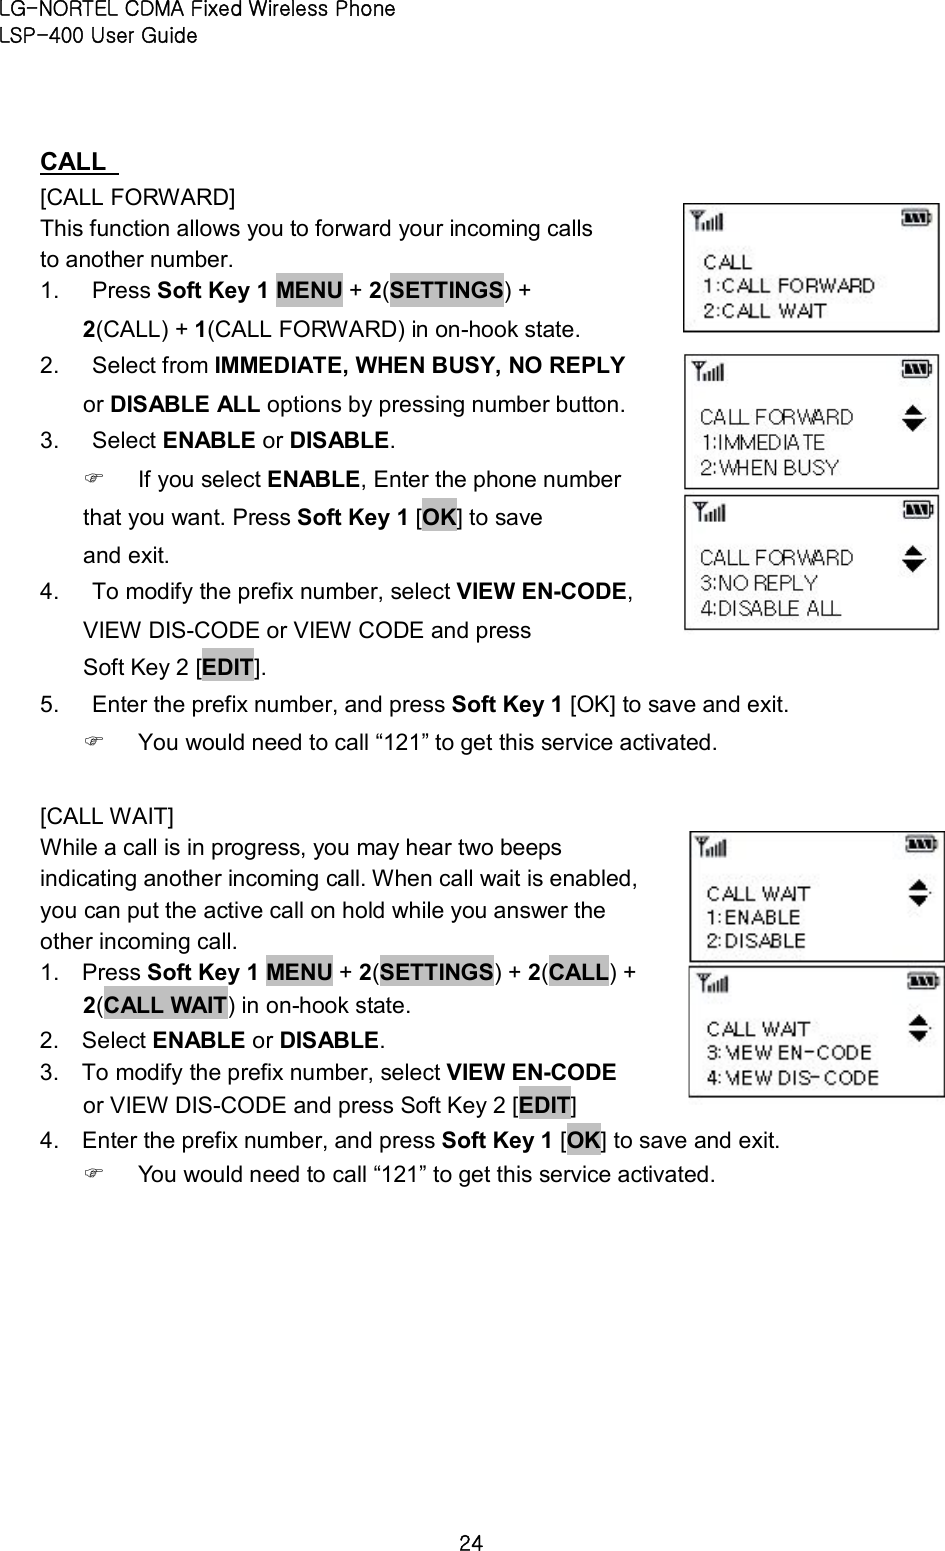 LG-NORTEL CDMA Fixed Wireless Phone   LSP-400 User Guide 24 CALL   [CALL FORWARD]   This function allows you to forward your incoming calls to another number.   1.  Press Soft Key 1 MENU + 2(SETTINGS) + 2(CALL) + 1(CALL FORWARD) in on-hook state.   2.  Select from IMMEDIATE, WHEN BUSY, NO REPLY or DISABLE ALL options by pressing number button.   3.  Select ENABLE or DISABLE.   F  If you select ENABLE, Enter the phone number that you want. Press Soft Key 1 [OK] to save and exit.   4.  To modify the prefix number, select VIEW EN-CODE, VIEW DIS-CODE or VIEW CODE and press Soft Key 2 [EDIT].   5.  Enter the prefix number, and press Soft Key 1 [OK] to save and exit.   F  You would need to call “121” to get this service activated.  [CALL WAIT]   While a call is in progress, you may hear two beeps indicating another incoming call. When call wait is enabled, you can put the active call on hold while you answer the other incoming call.   1.  Press Soft Key 1 MENU + 2(SETTINGS) + 2(CALL) + 2(CALL WAIT) in on-hook state.   2.  Select ENABLE or DISABLE.   3.  To modify the prefix number, select VIEW EN-CODE or VIEW DIS-CODE and press Soft Key 2 [EDIT]   4.  Enter the prefix number, and press Soft Key 1 [OK] to save and exit.   F  You would need to call “121” to get this service activated.      